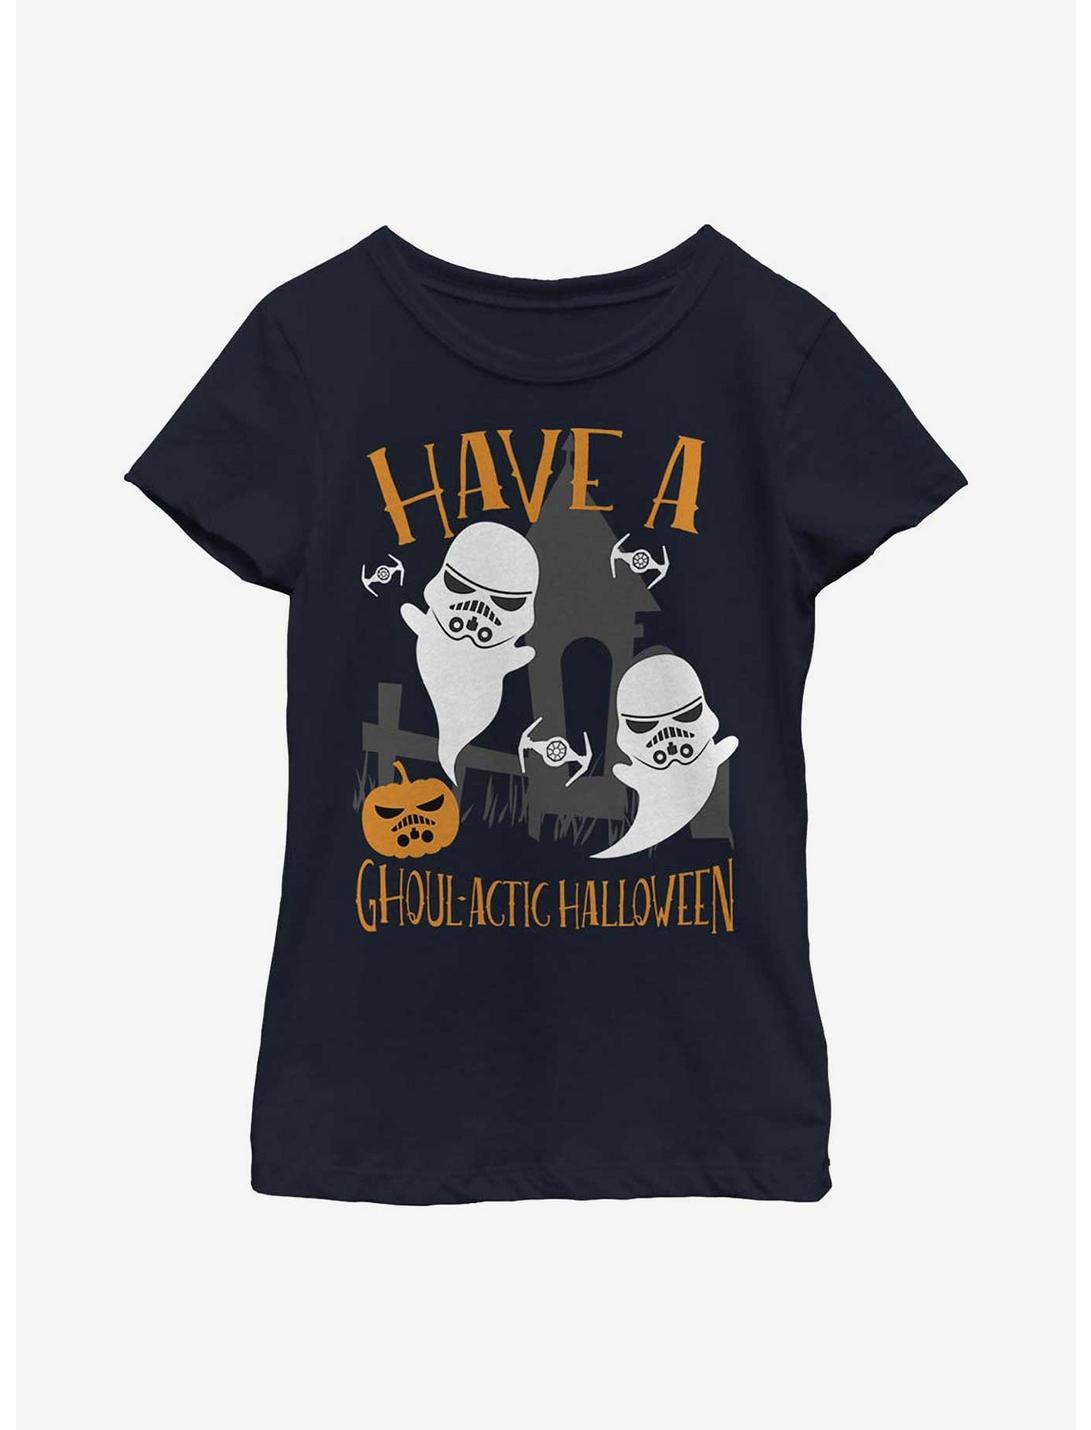 Star Wars Ghoulactic Haloween Youth Girls T-Shirt, NAVY, hi-res